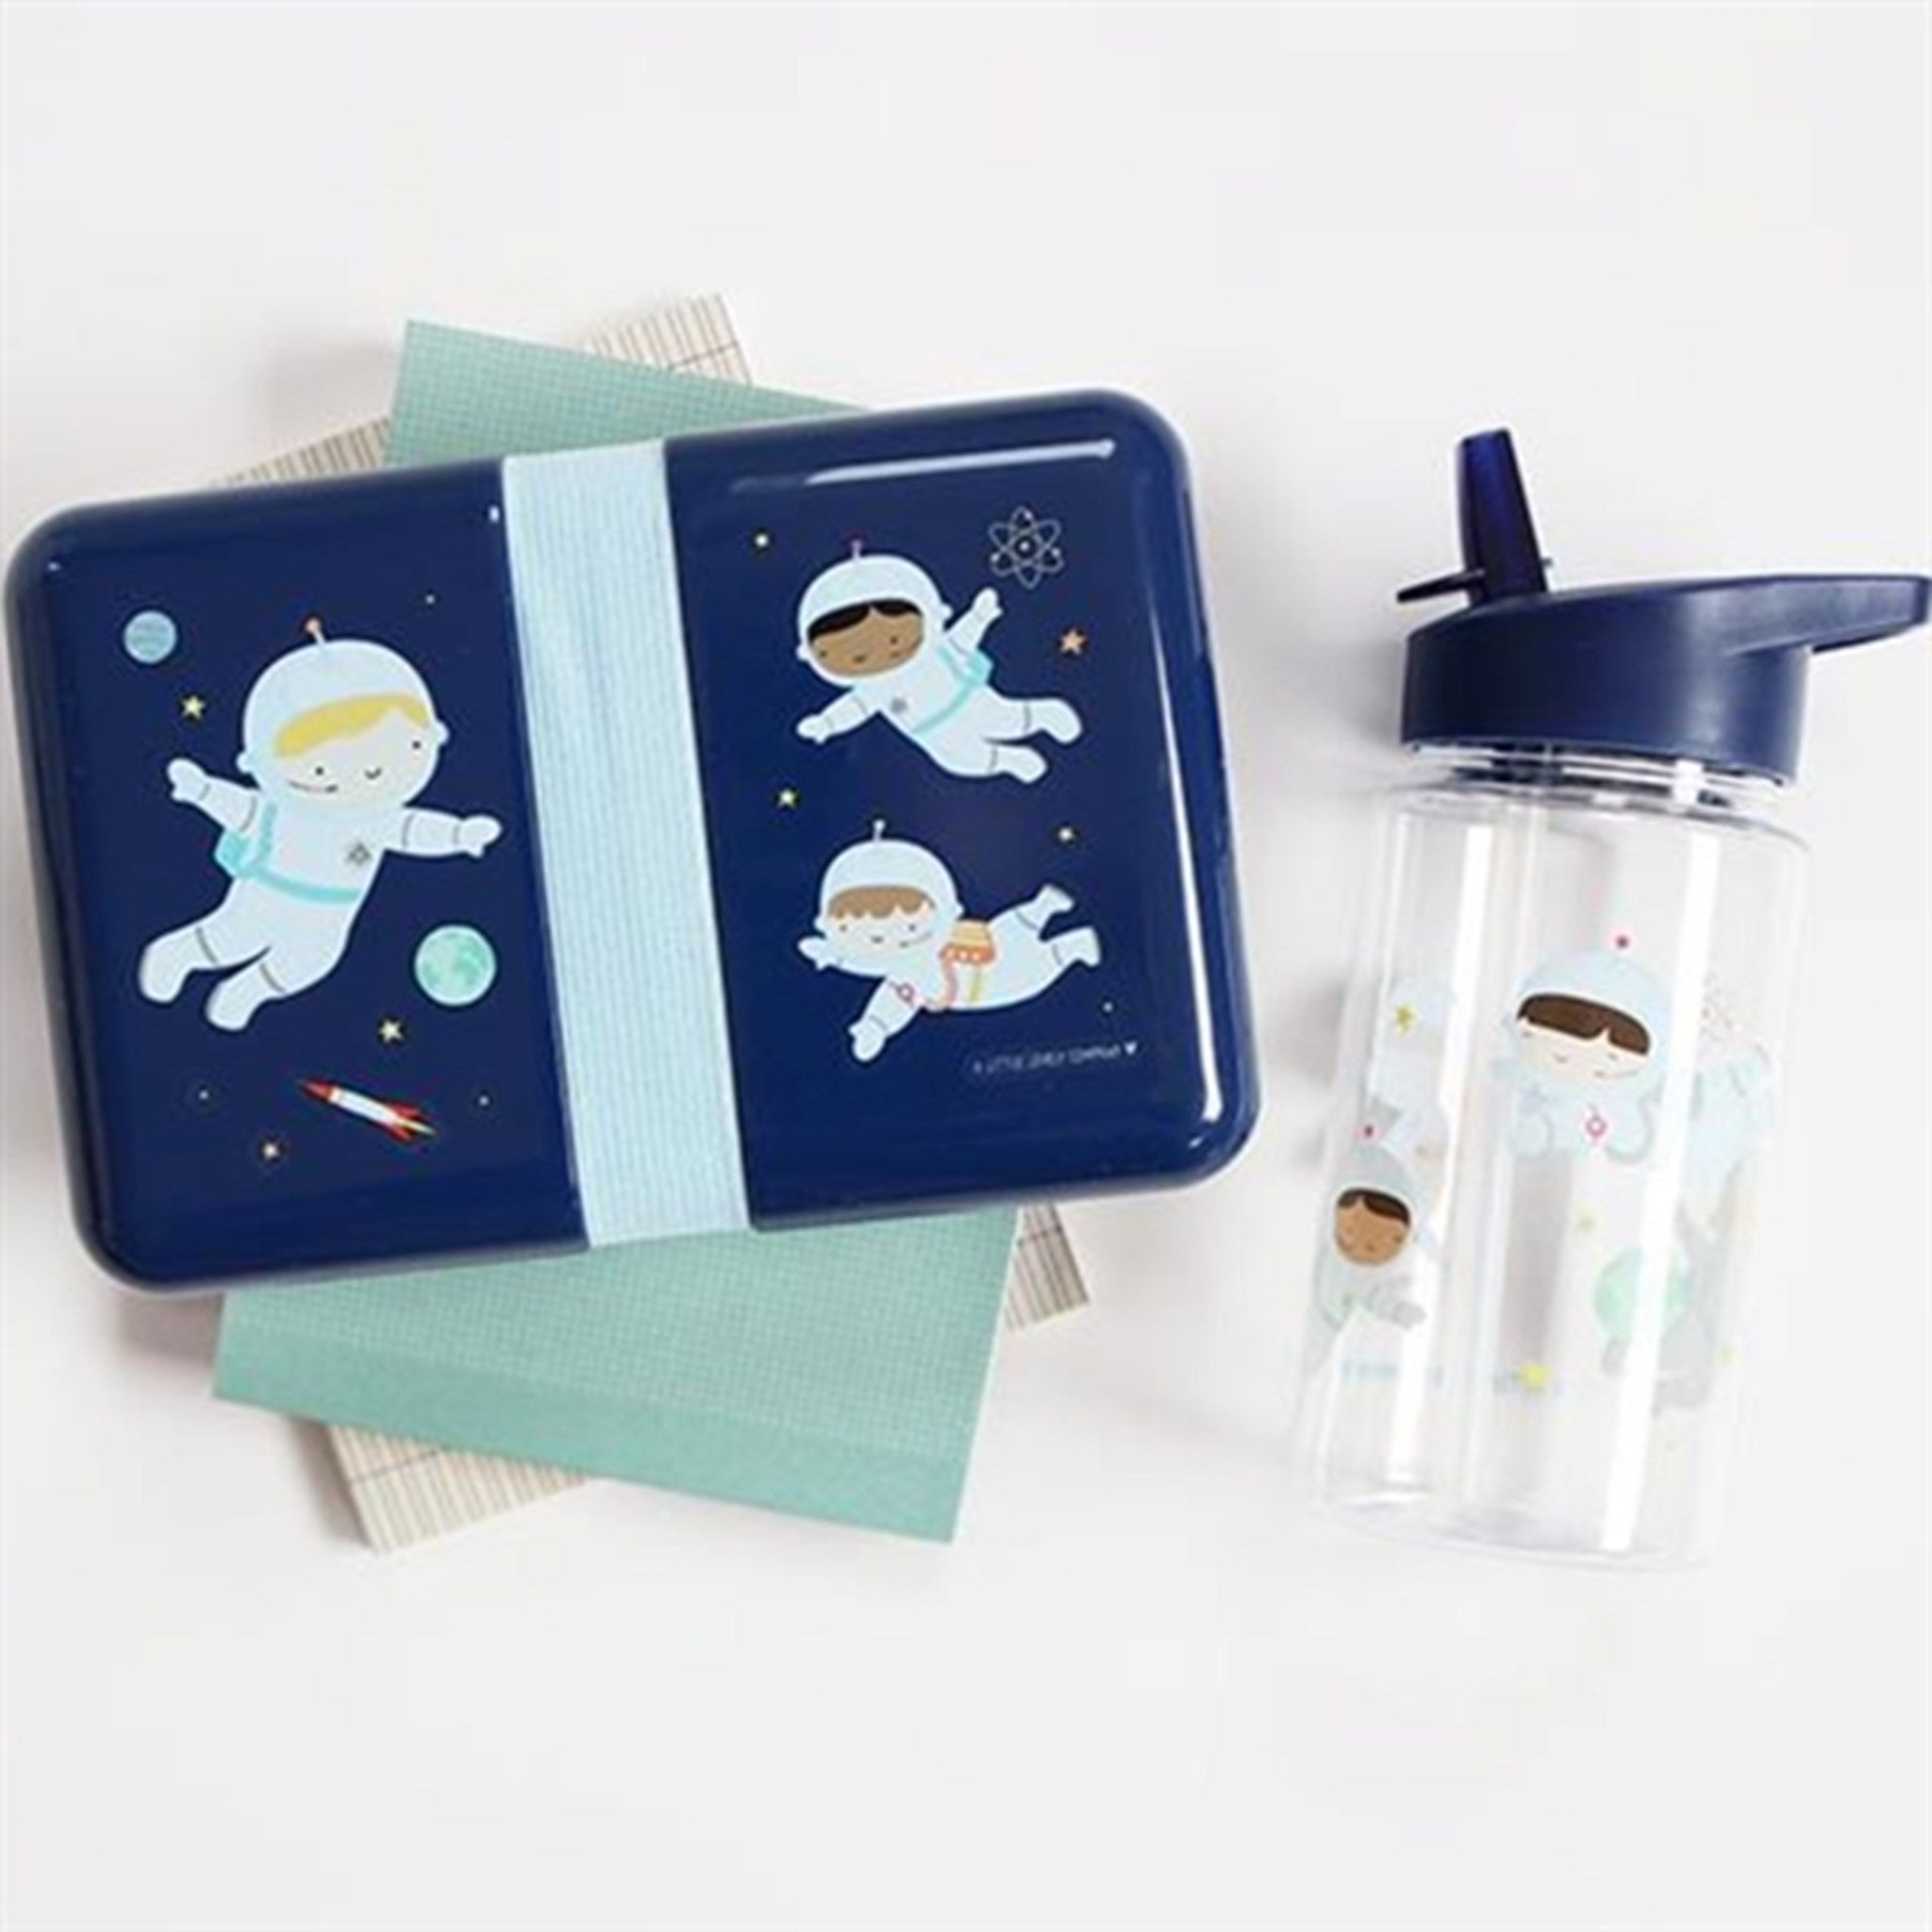 A Little Lovely Company Lunch Box Astronauts 3